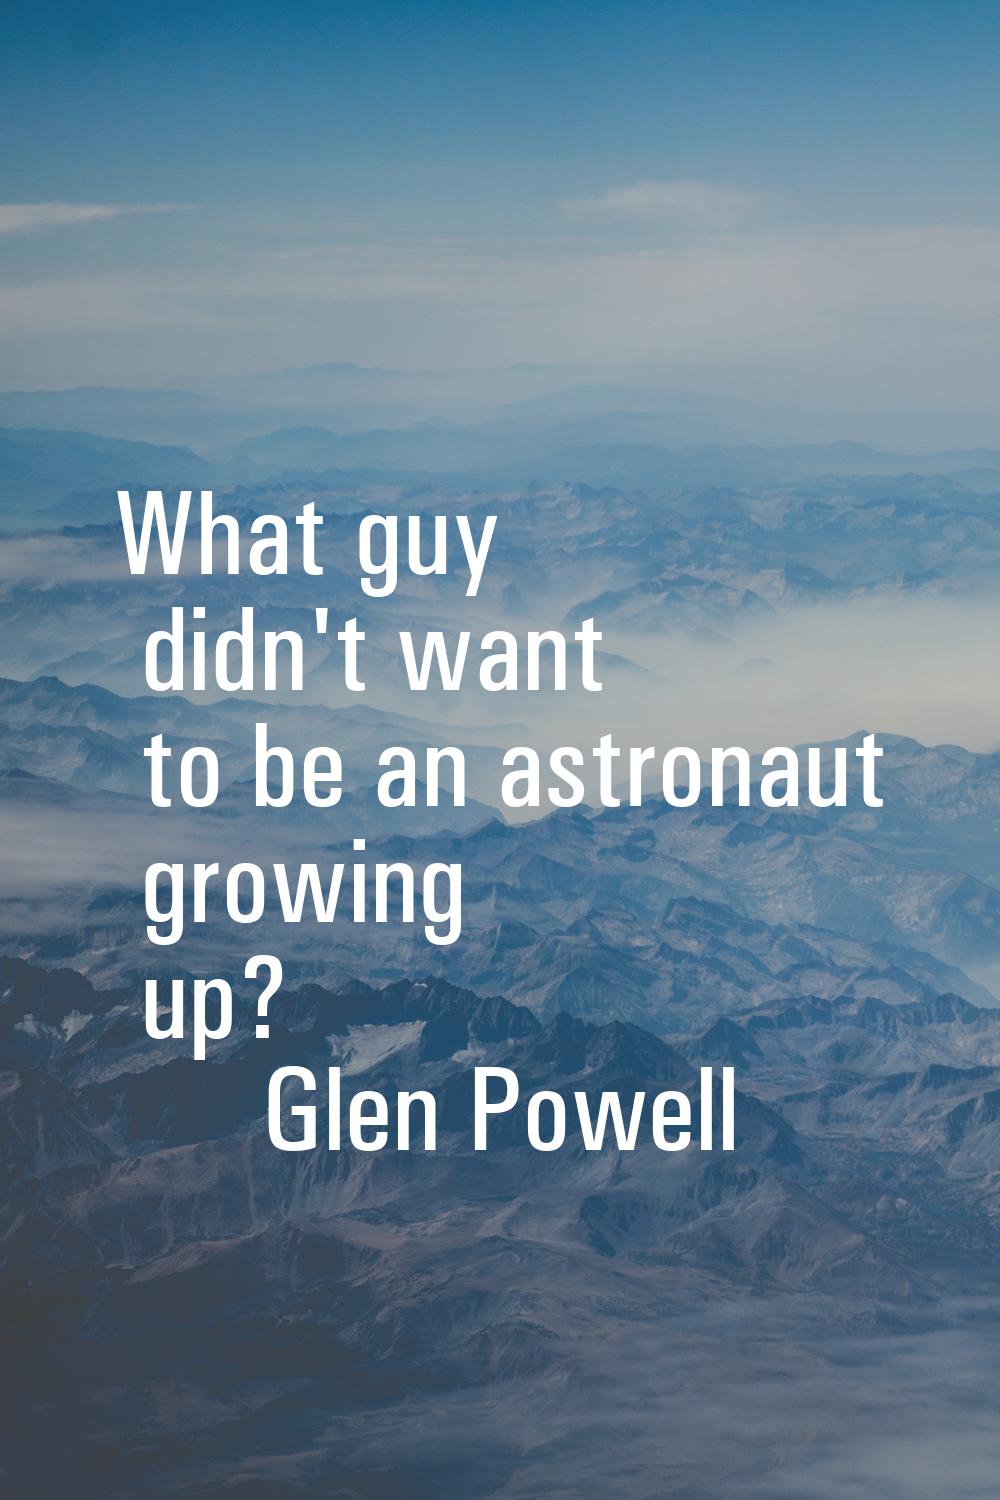 What guy didn't want to be an astronaut growing up?